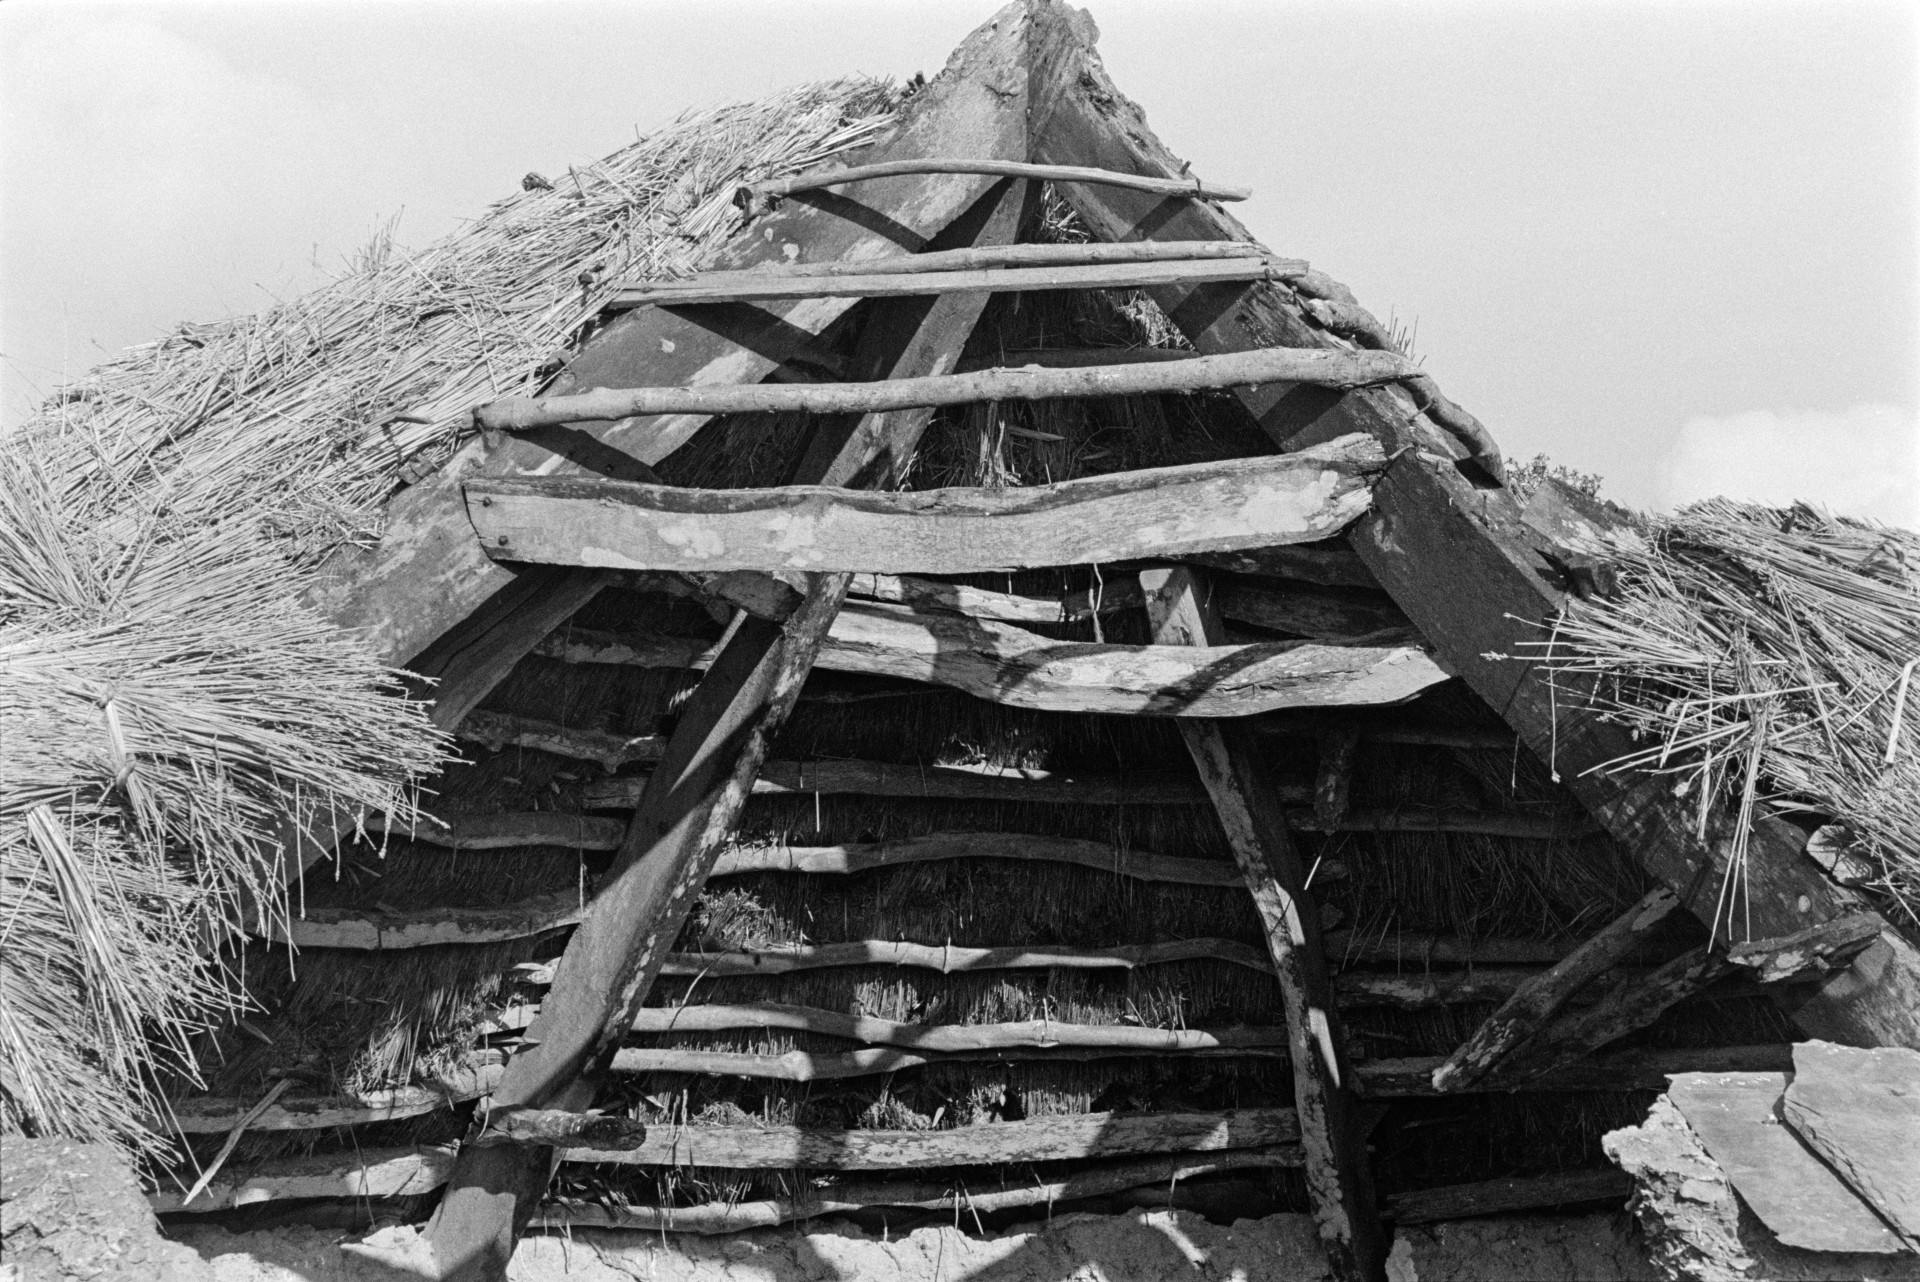 A collapsing thatched roof of a derelict circular stone barn at Saunton. The roof timbers of the barn are exposed.